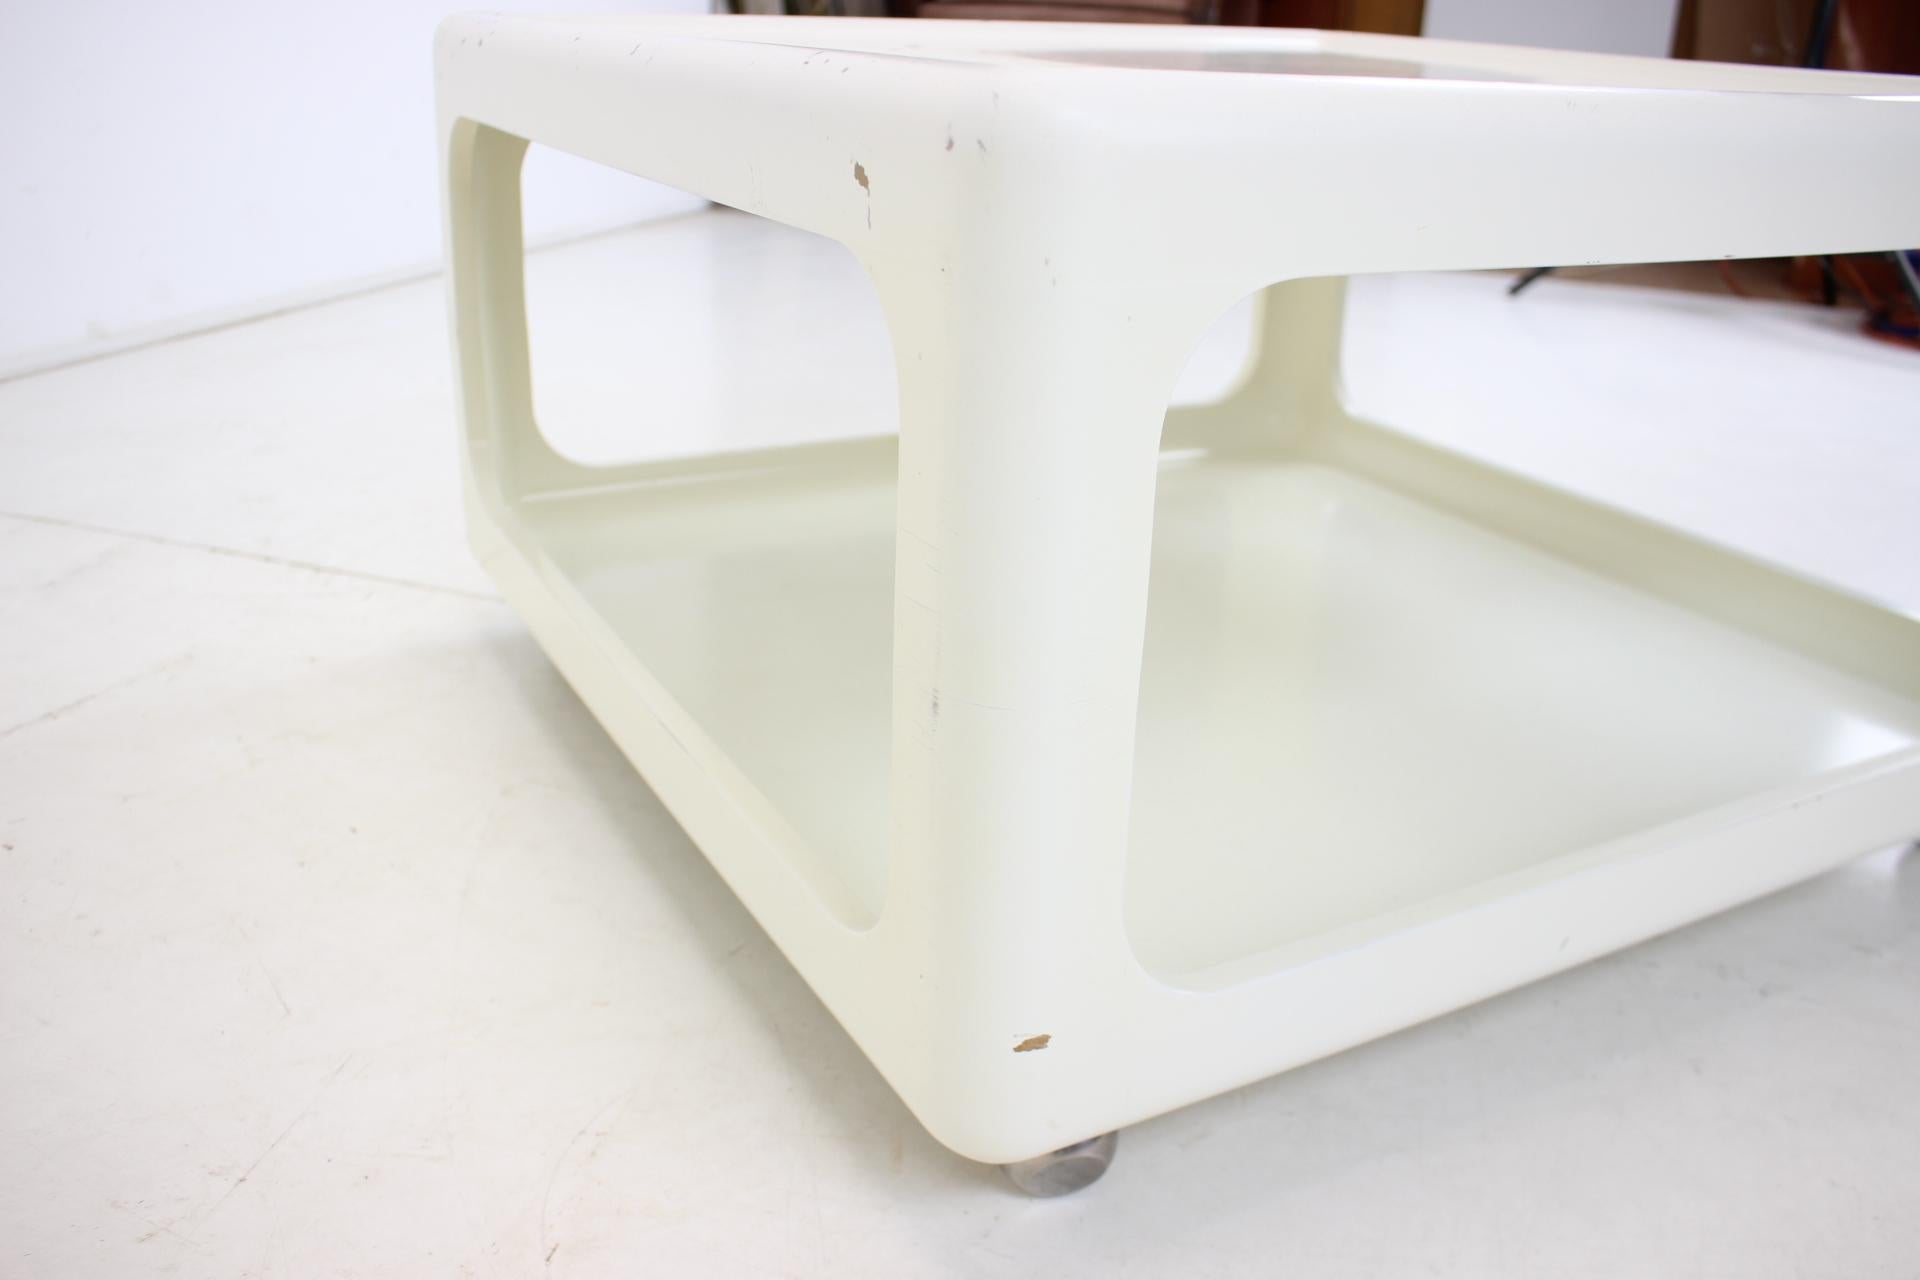 Plastic Mid-Century Space Age Coffee Table, Peter Ghyczy and Ernst Moeckl, Germany, 1970 For Sale